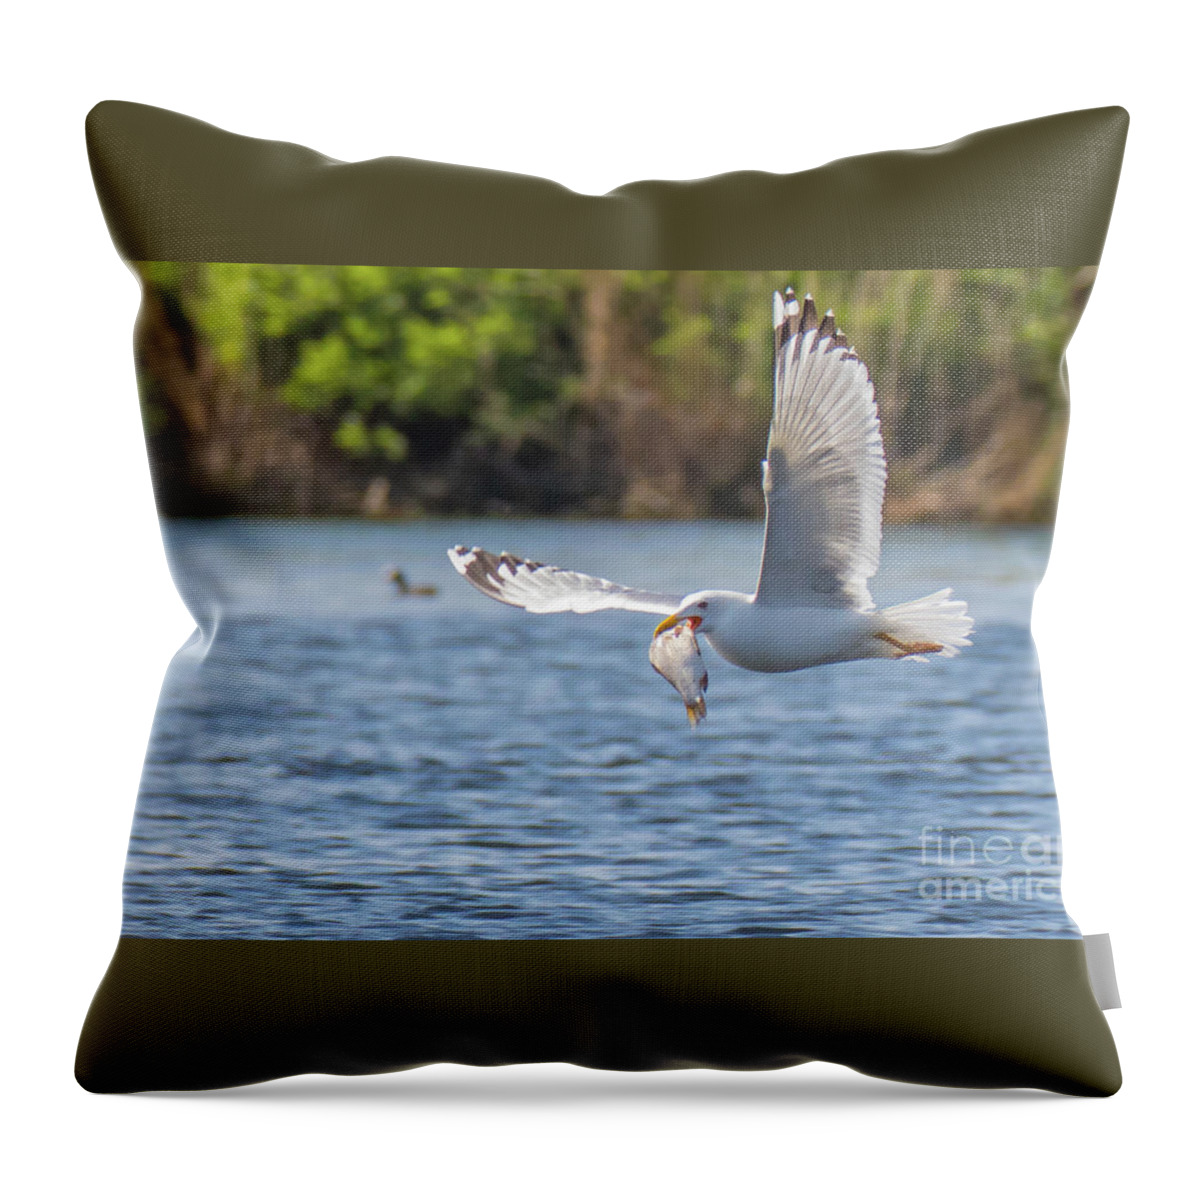 Animal Throw Pillow featuring the photograph Breakfast by Jivko Nakev